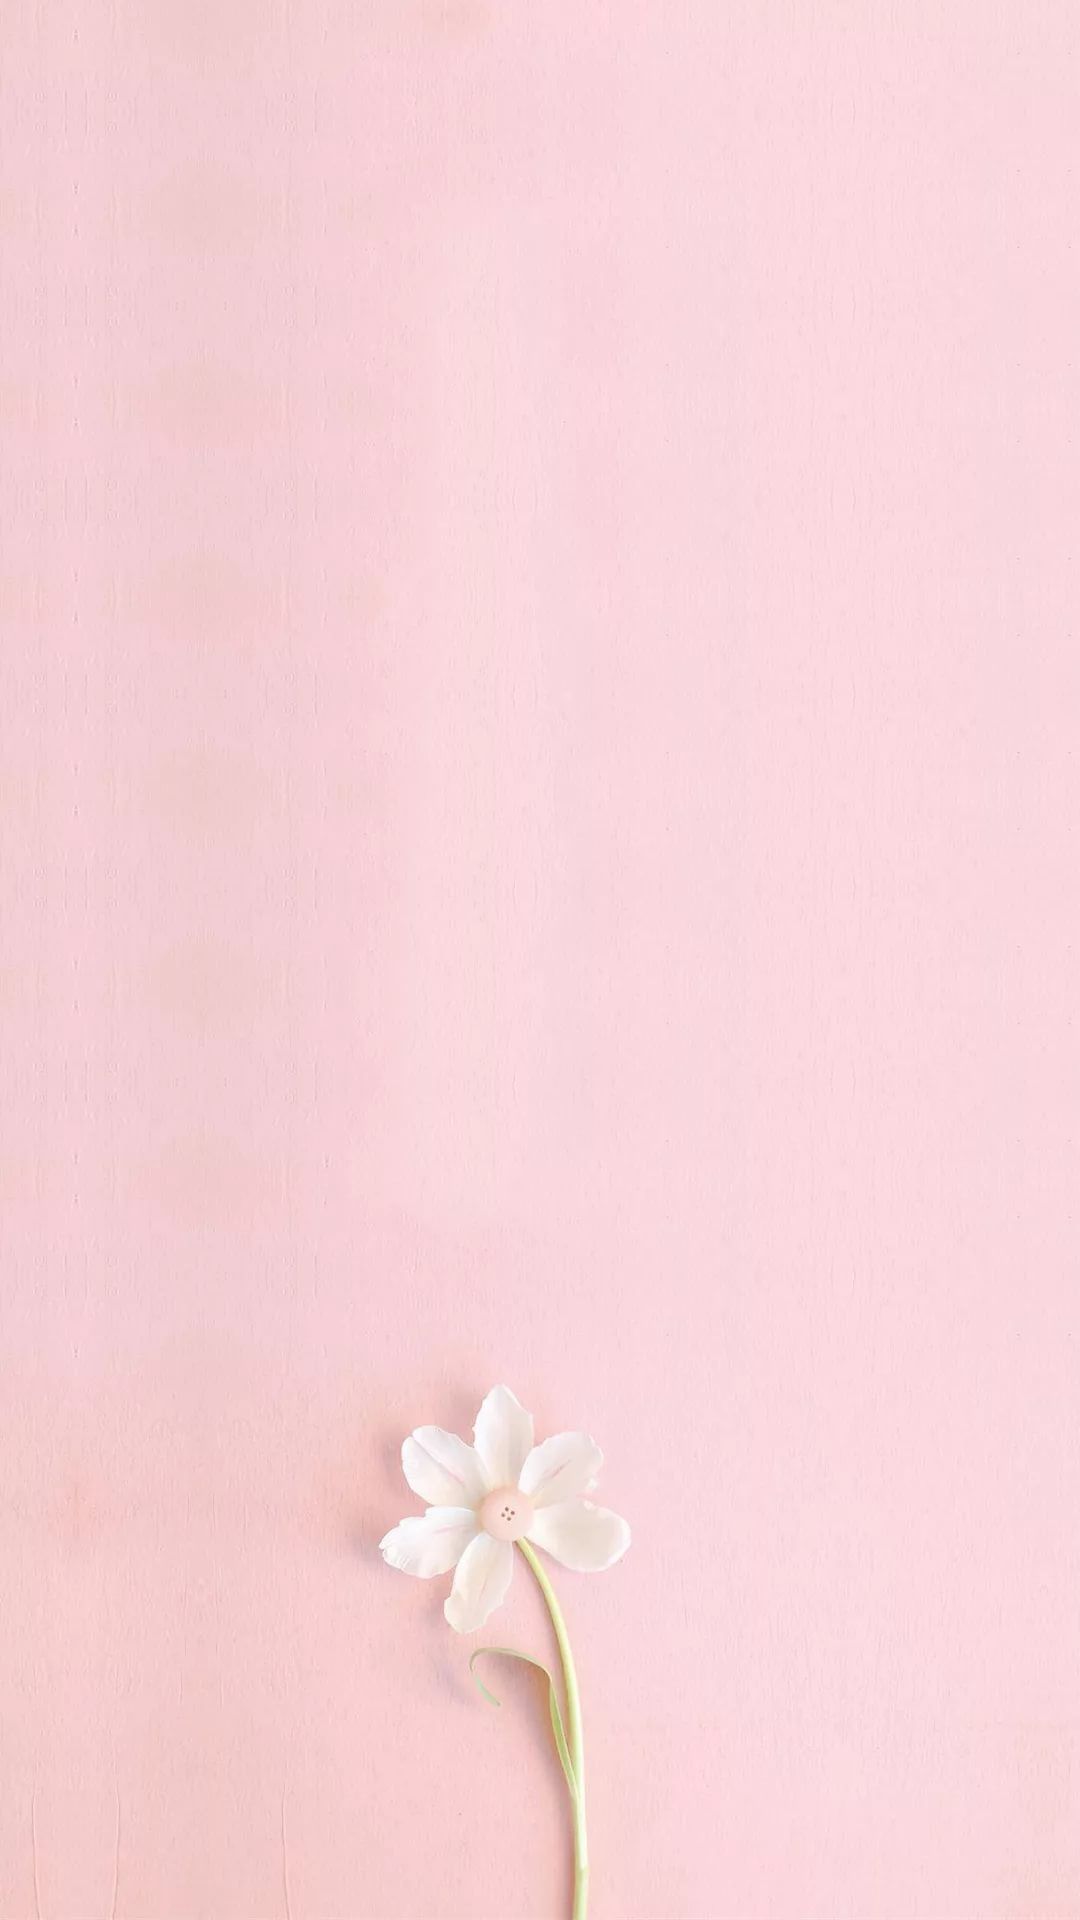 Pink Phone Wallpapers